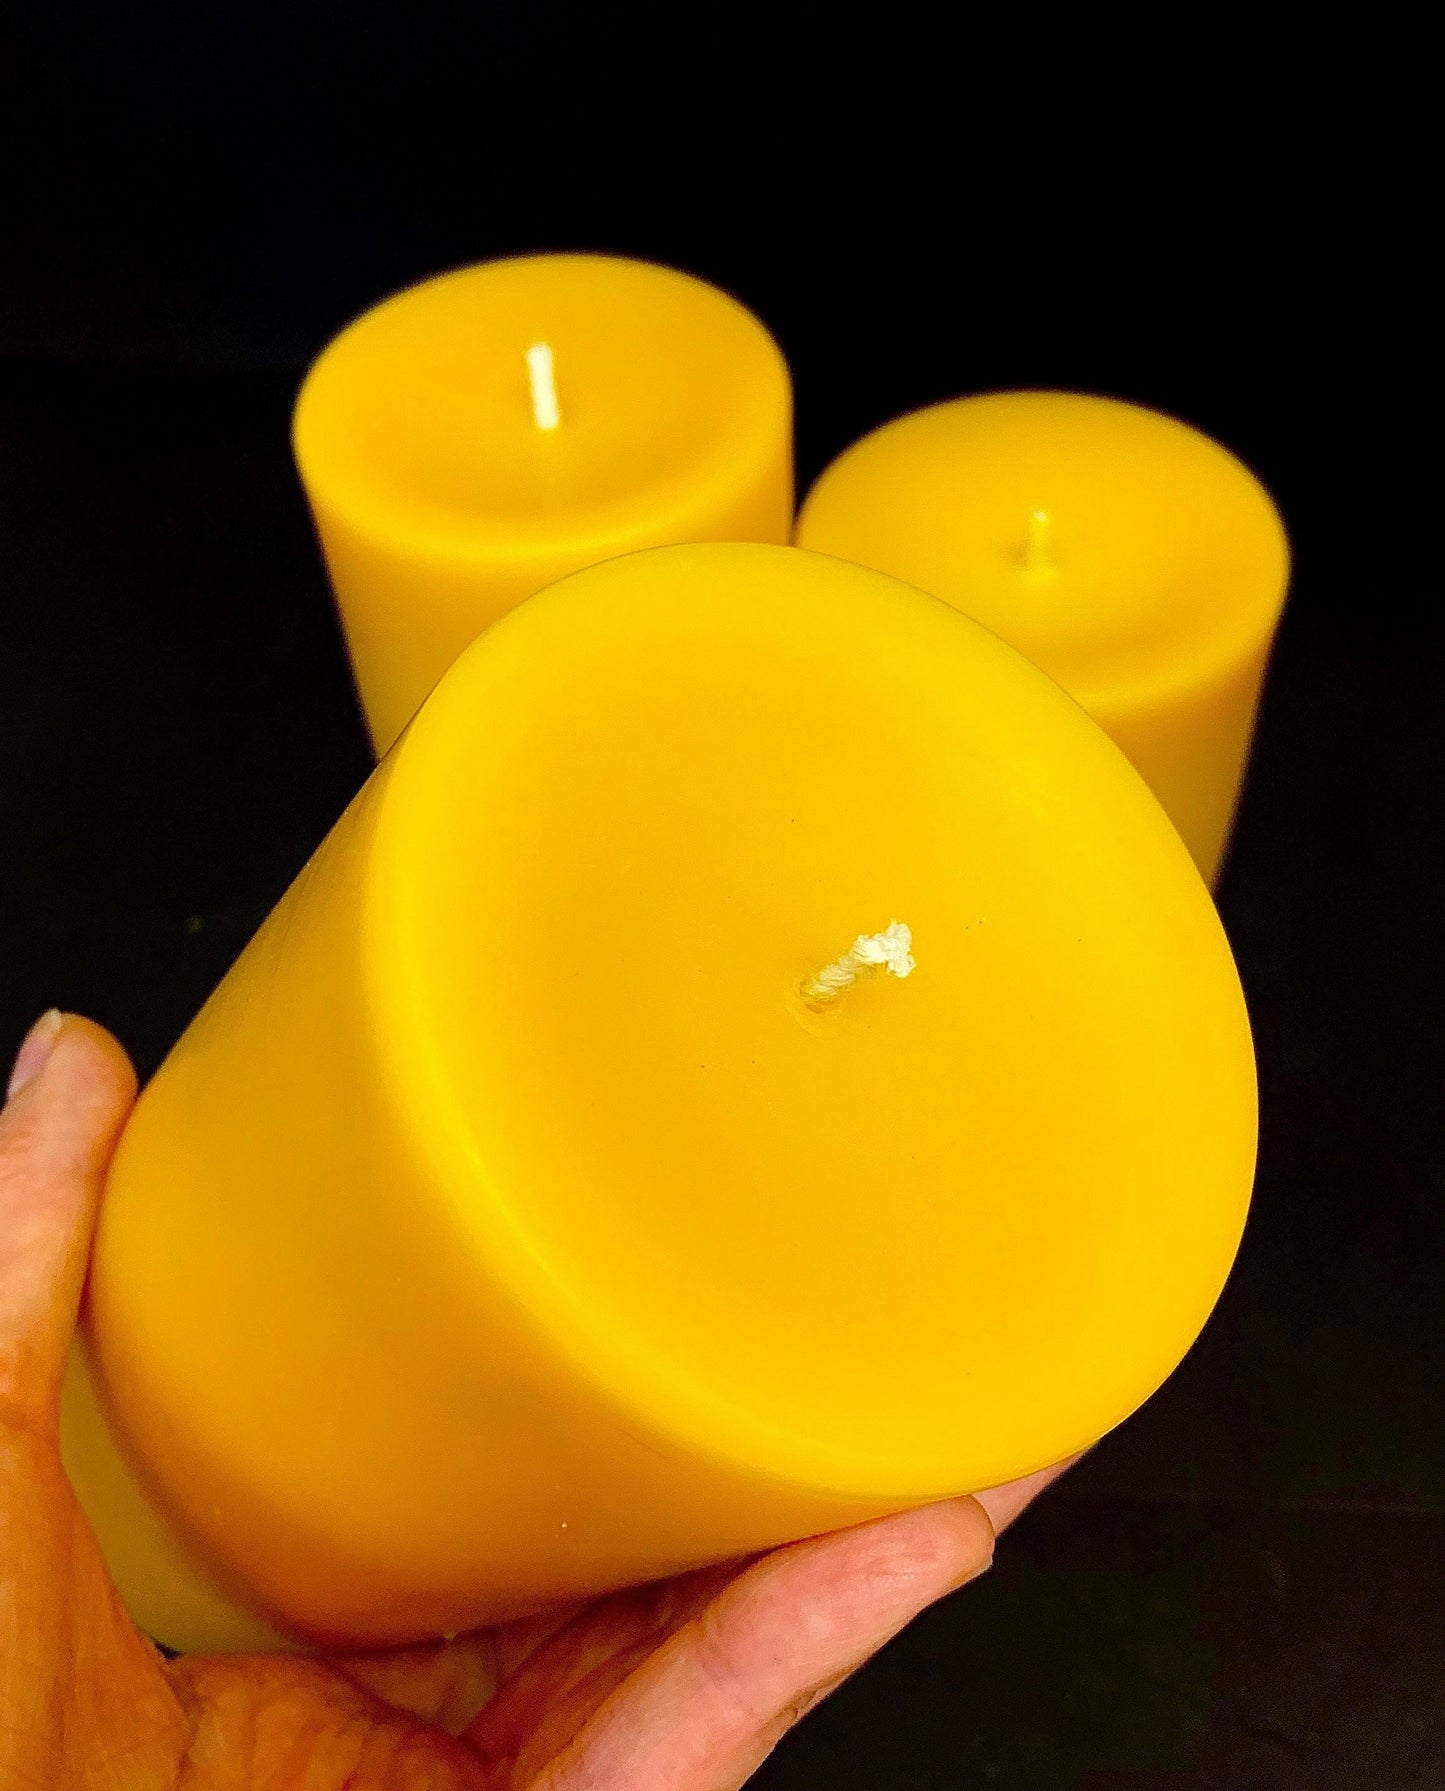 Big silicone pillar candle mold - round cylinder mold - soap resin mold - homemade - 3” x 9.5”